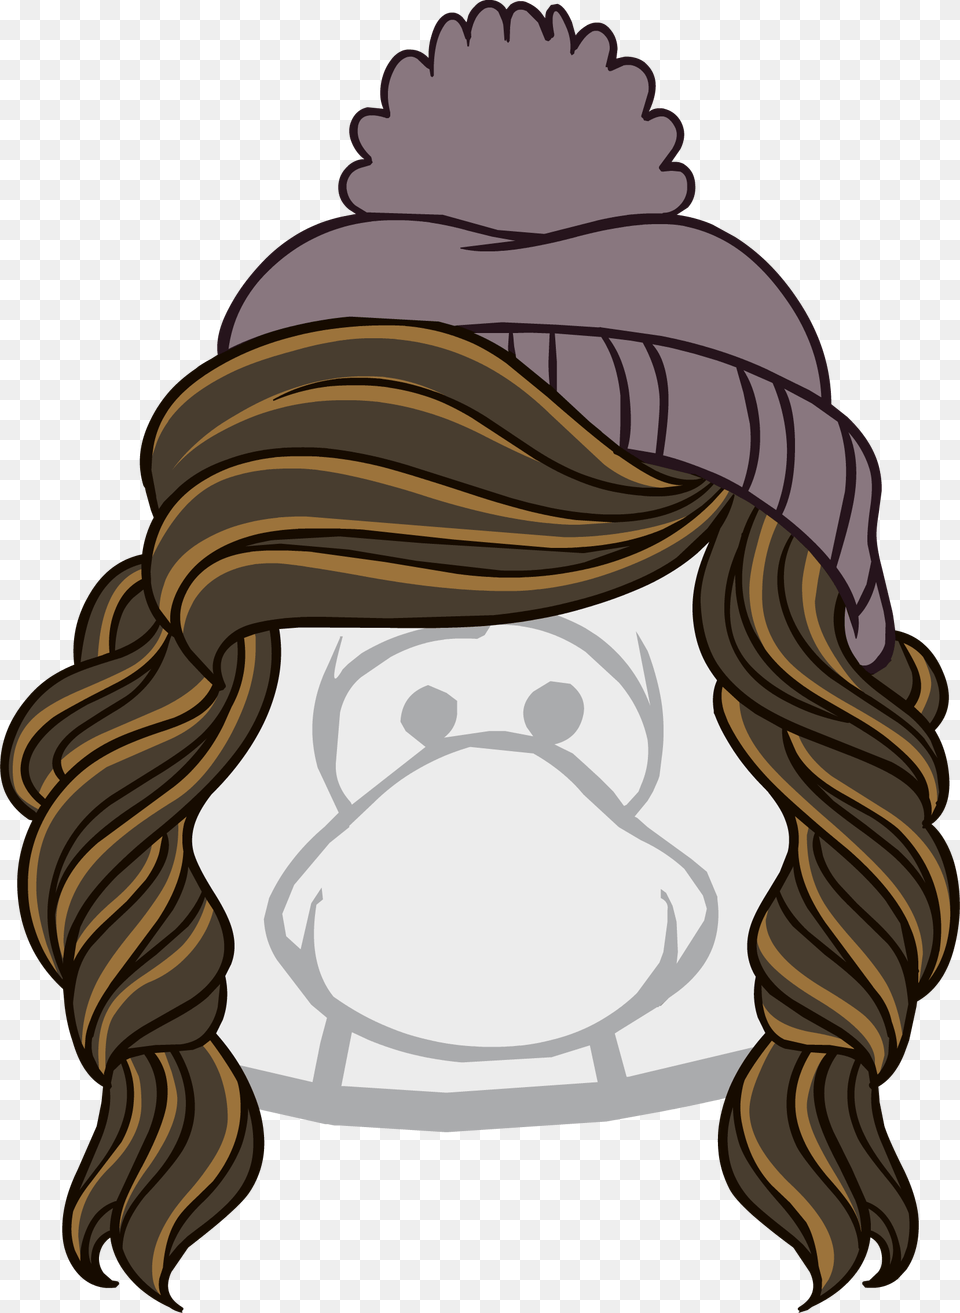 The Snow Day Clothing Icon Id Club Penguin Optic Headset, Hat, Person, Baby, Comics Free Transparent Png